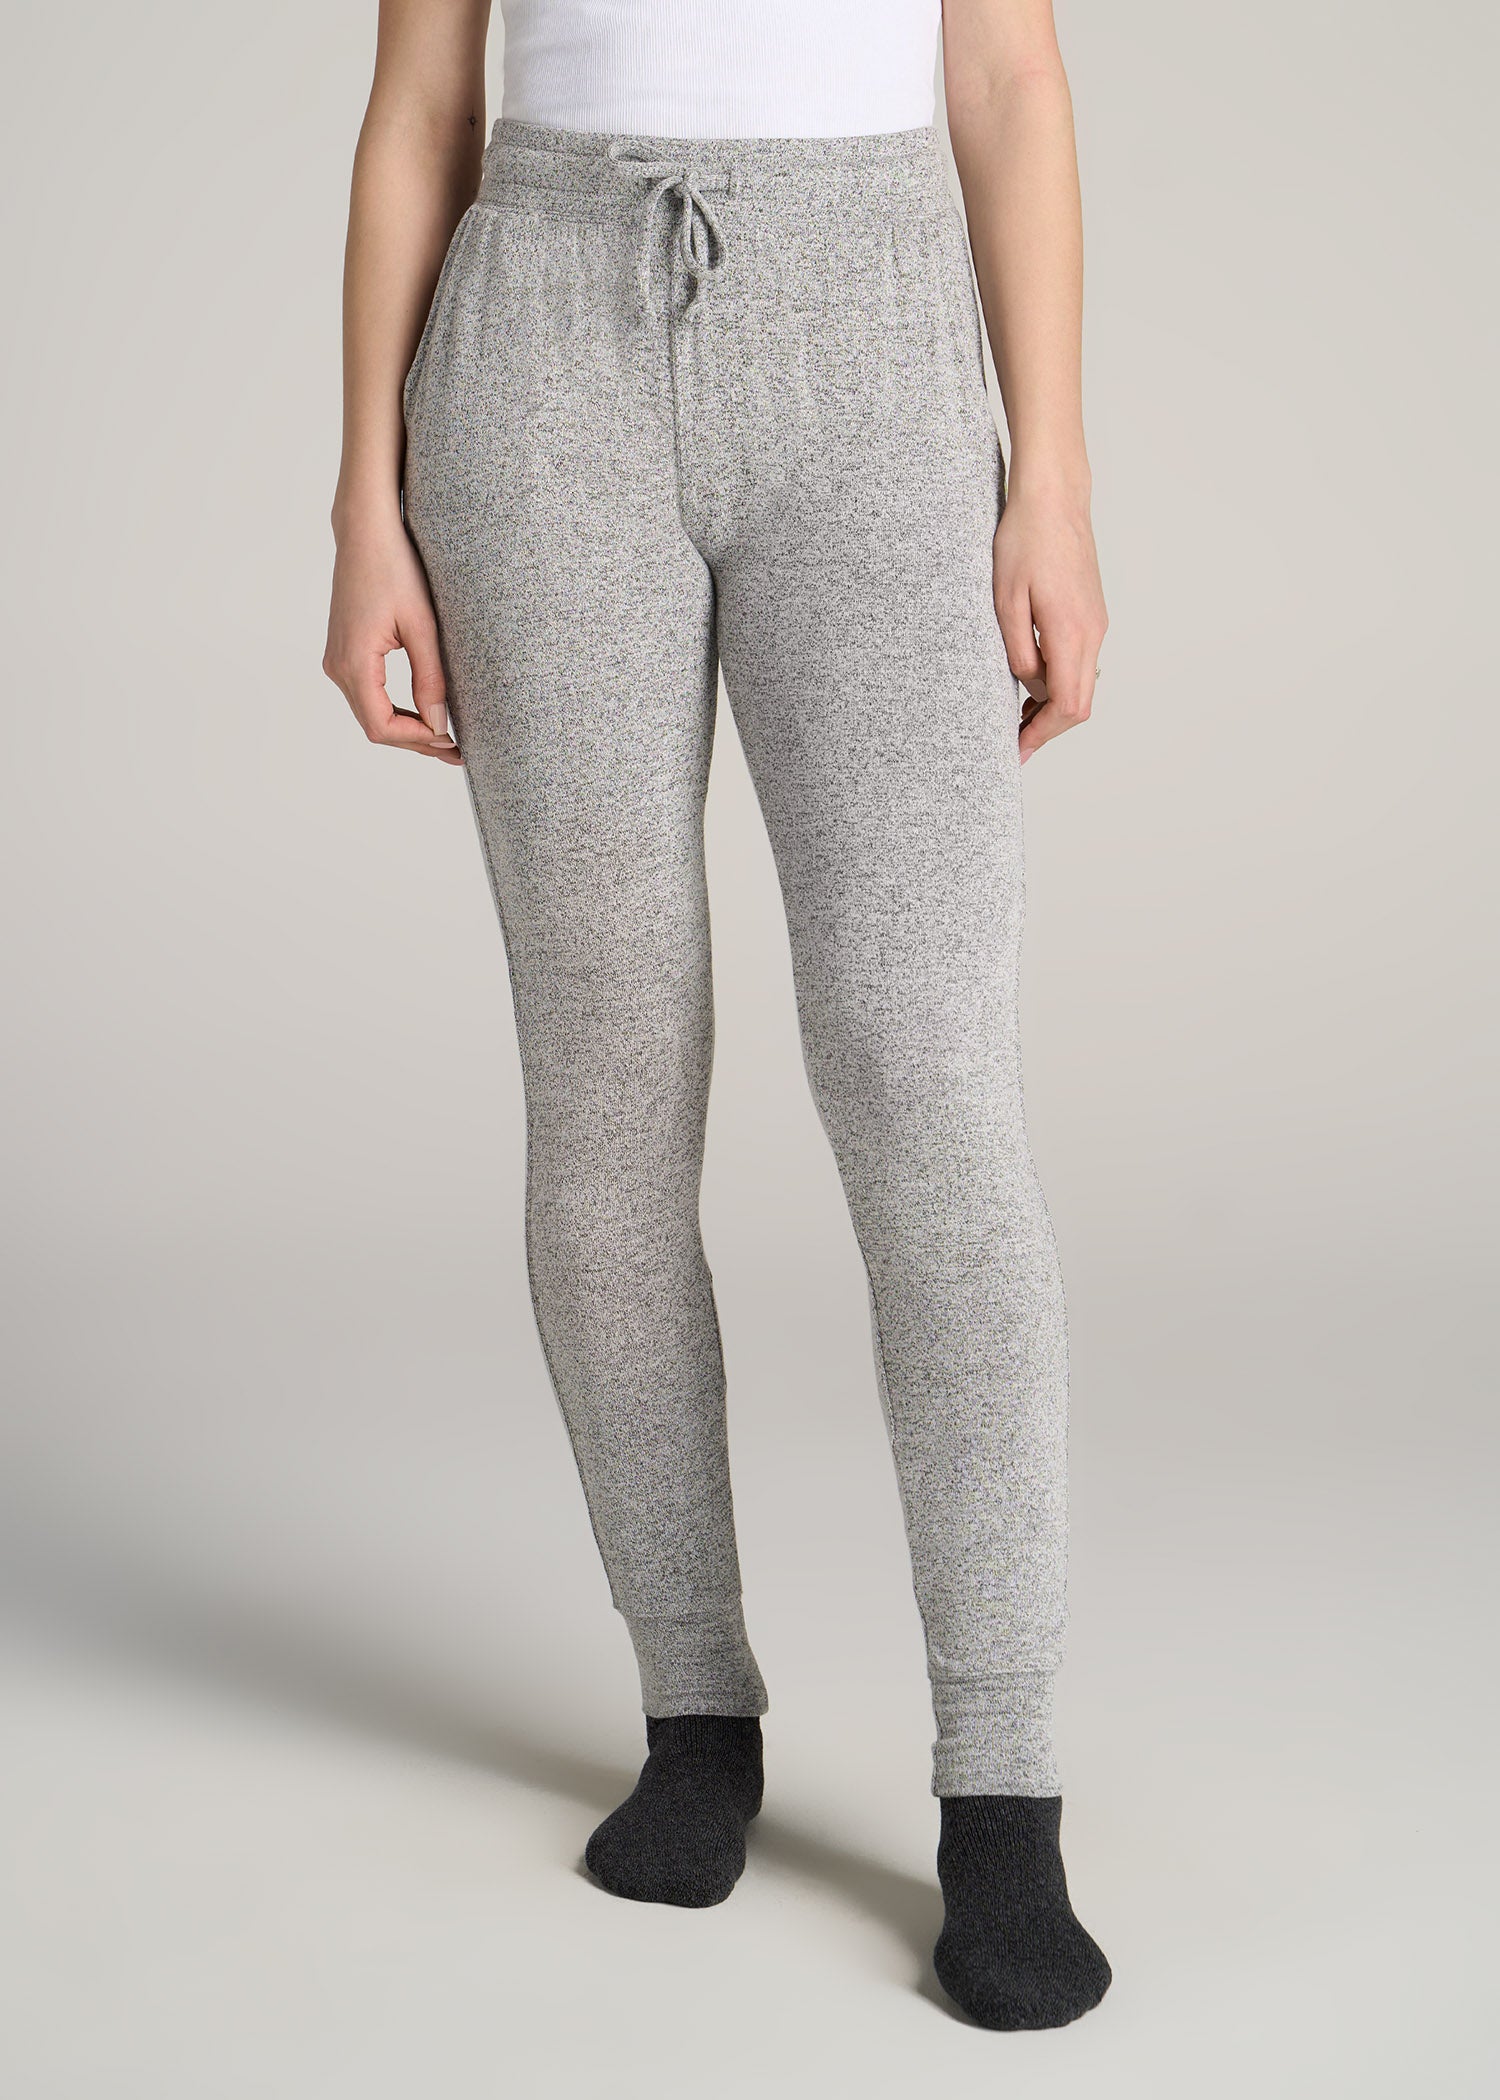 Athletic Works, Pants & Jumpsuits, Athletic Works Womens Soft Joggers In  Black And Grey Camo